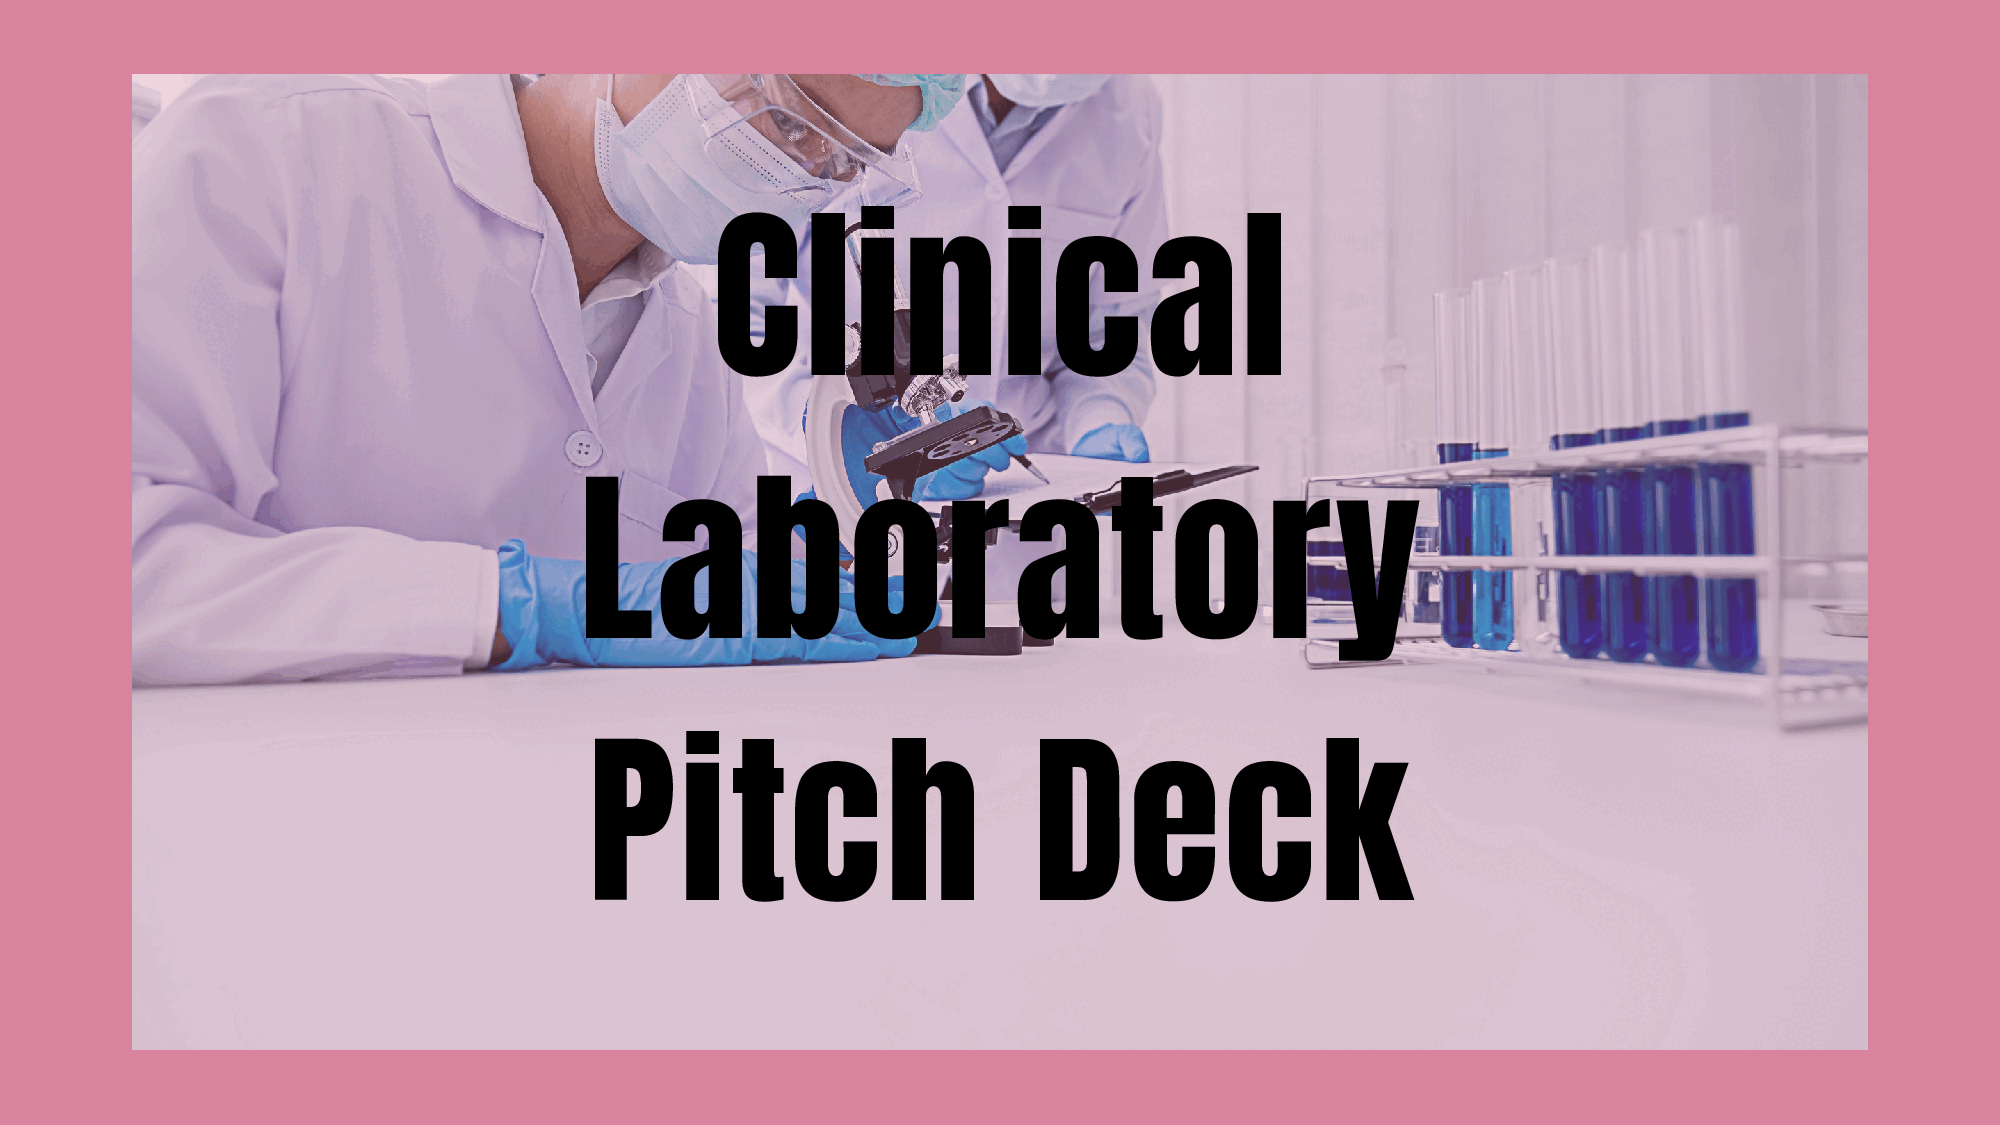 Clinical Laboratory Pitch Deck Template